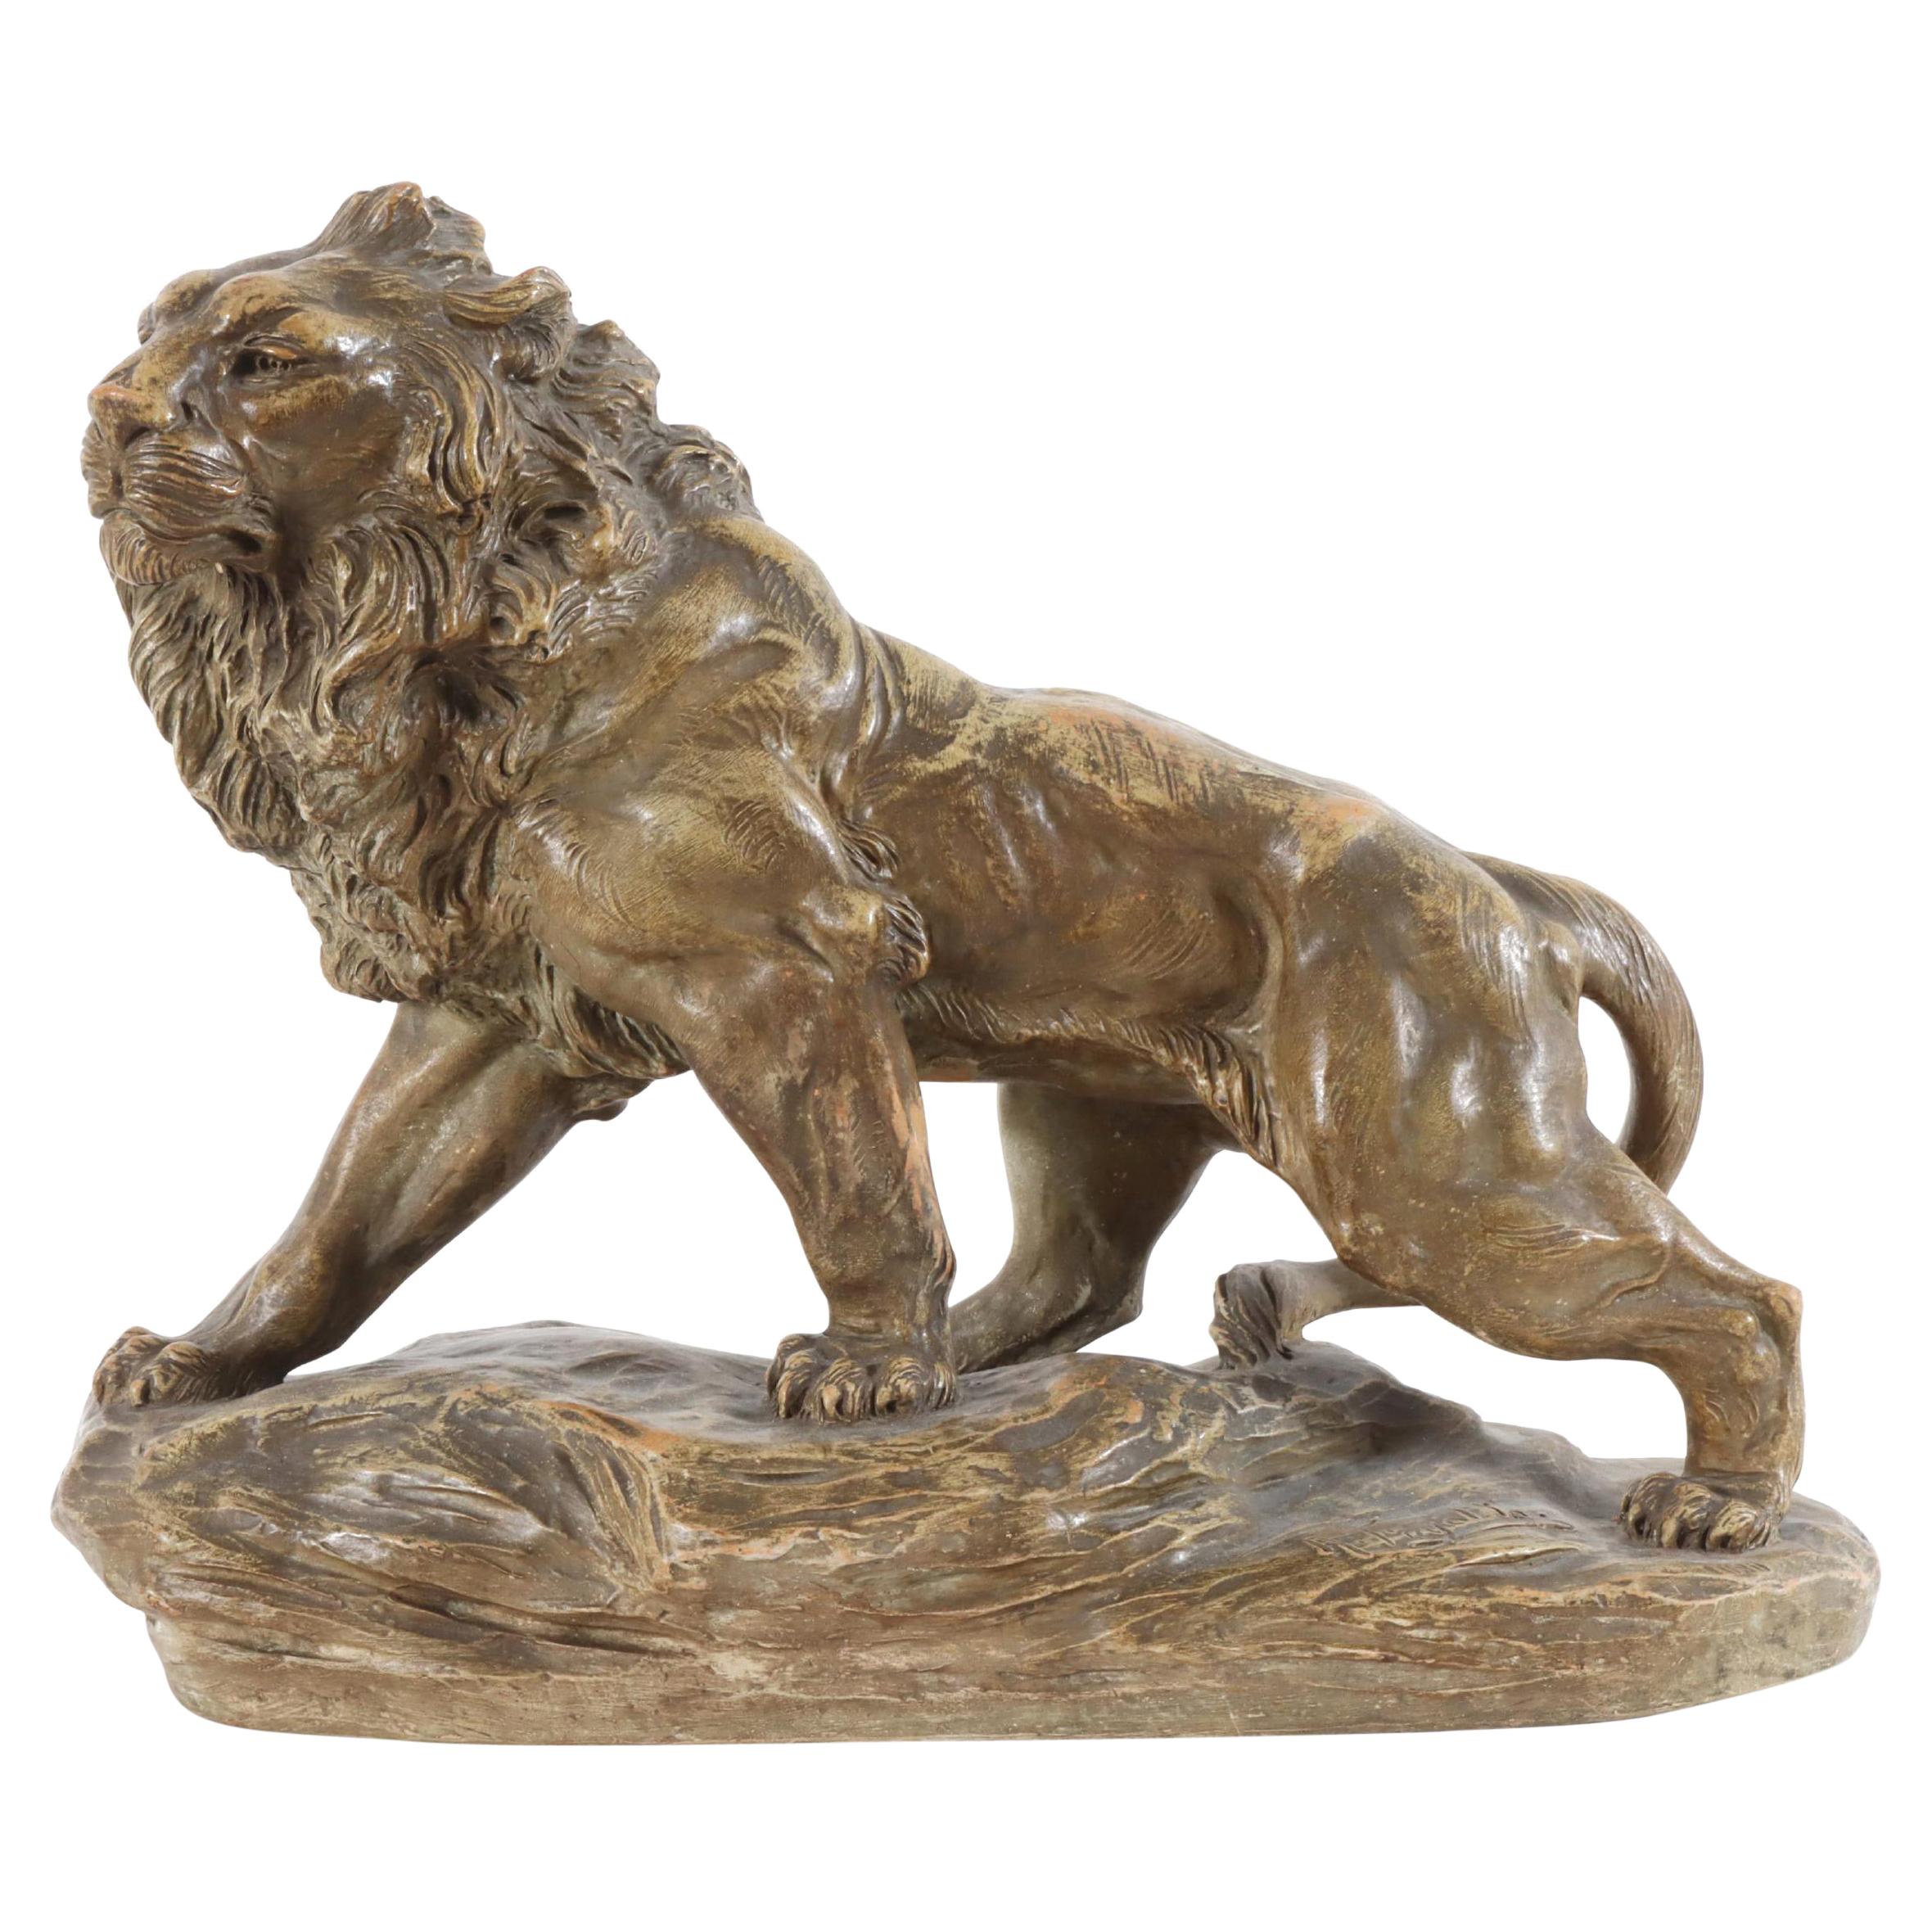 Terracotta Sculpture of a Lion, Signed Armand Fagotto, ca. 1900 For Sale